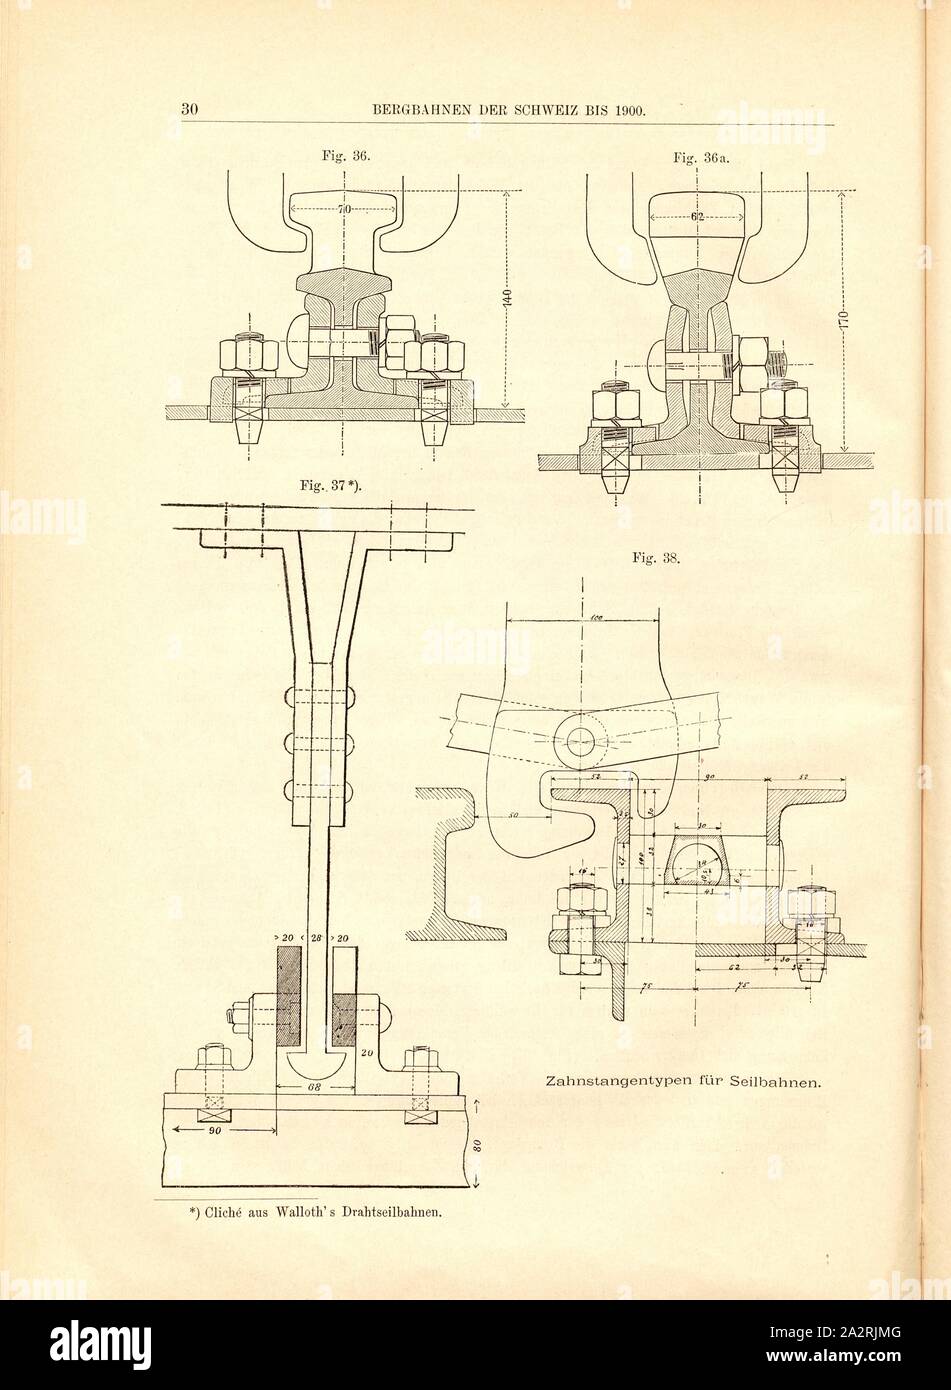 Rack types for cable cars, Fig. 36-38: Technical drawings of racks for ...